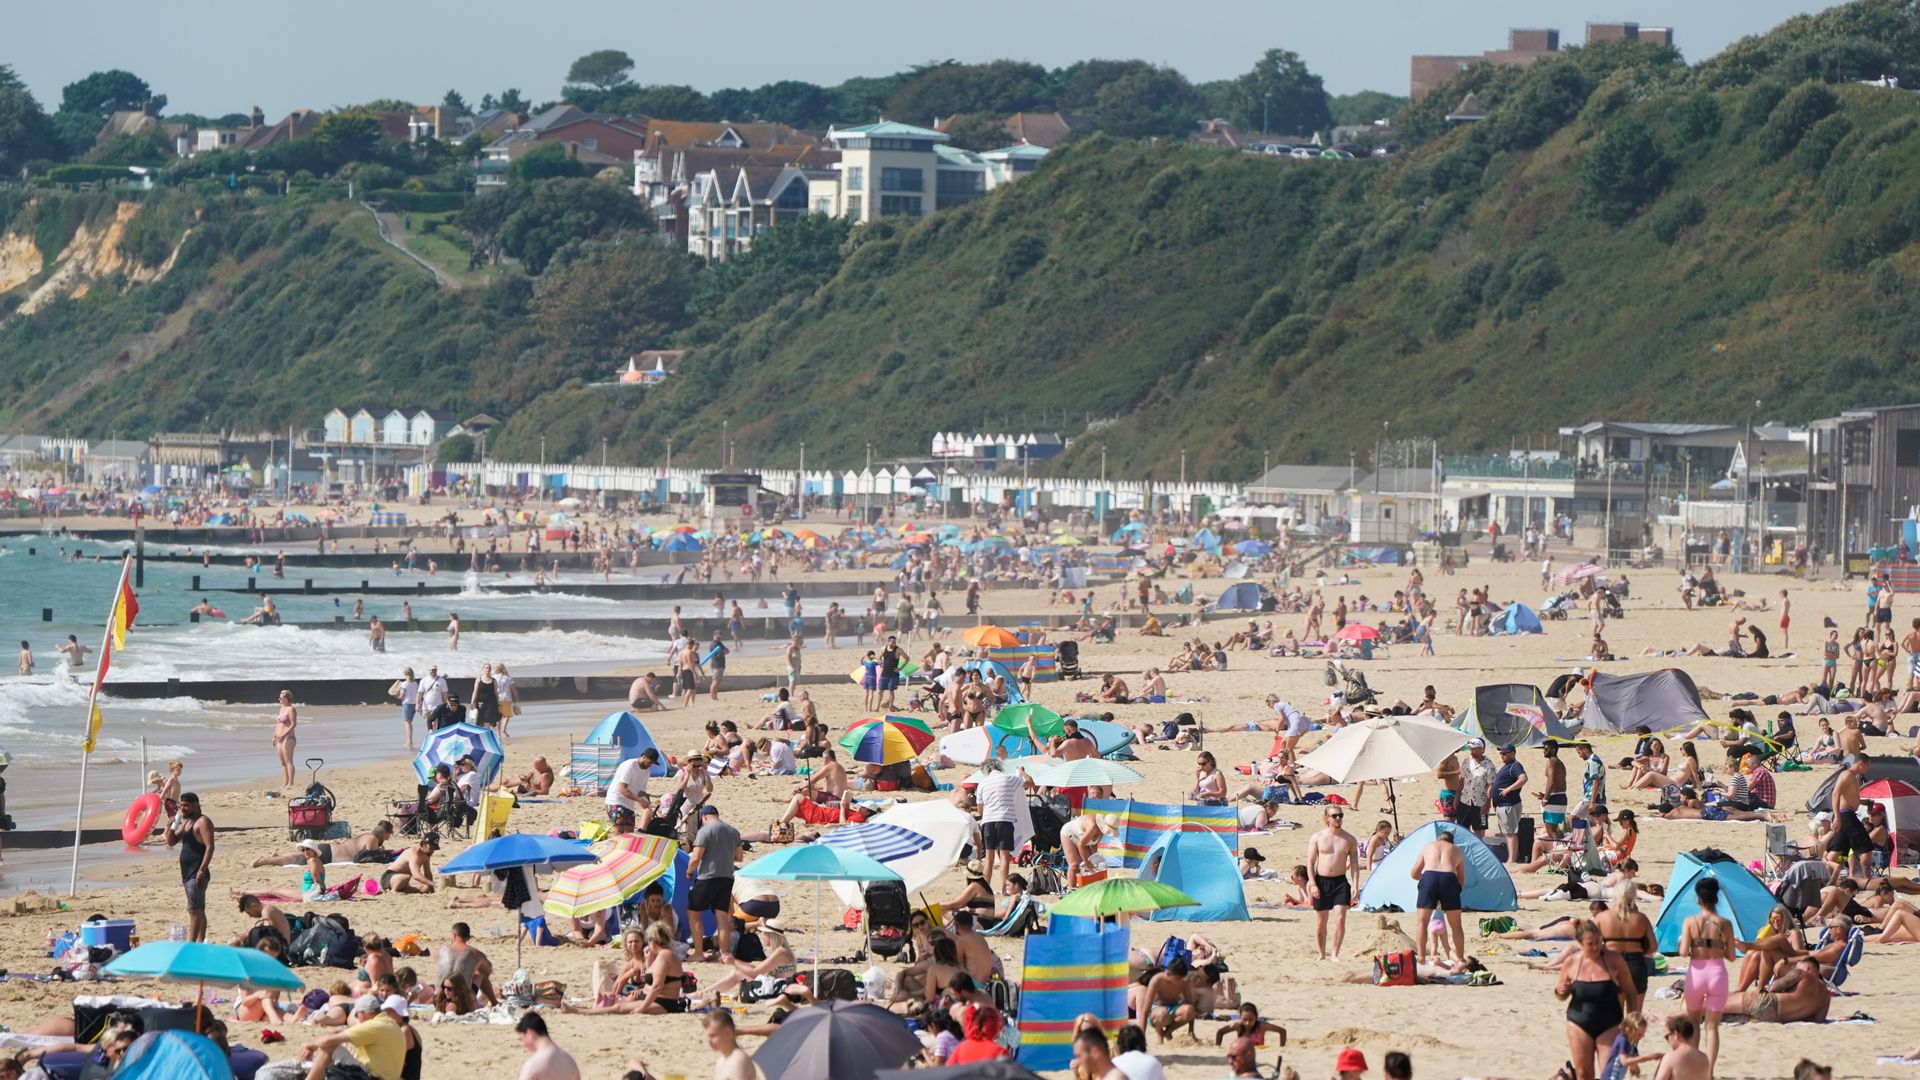 Temperatures set to rise across UK - with some areas forecast to be as hot as Ibiza